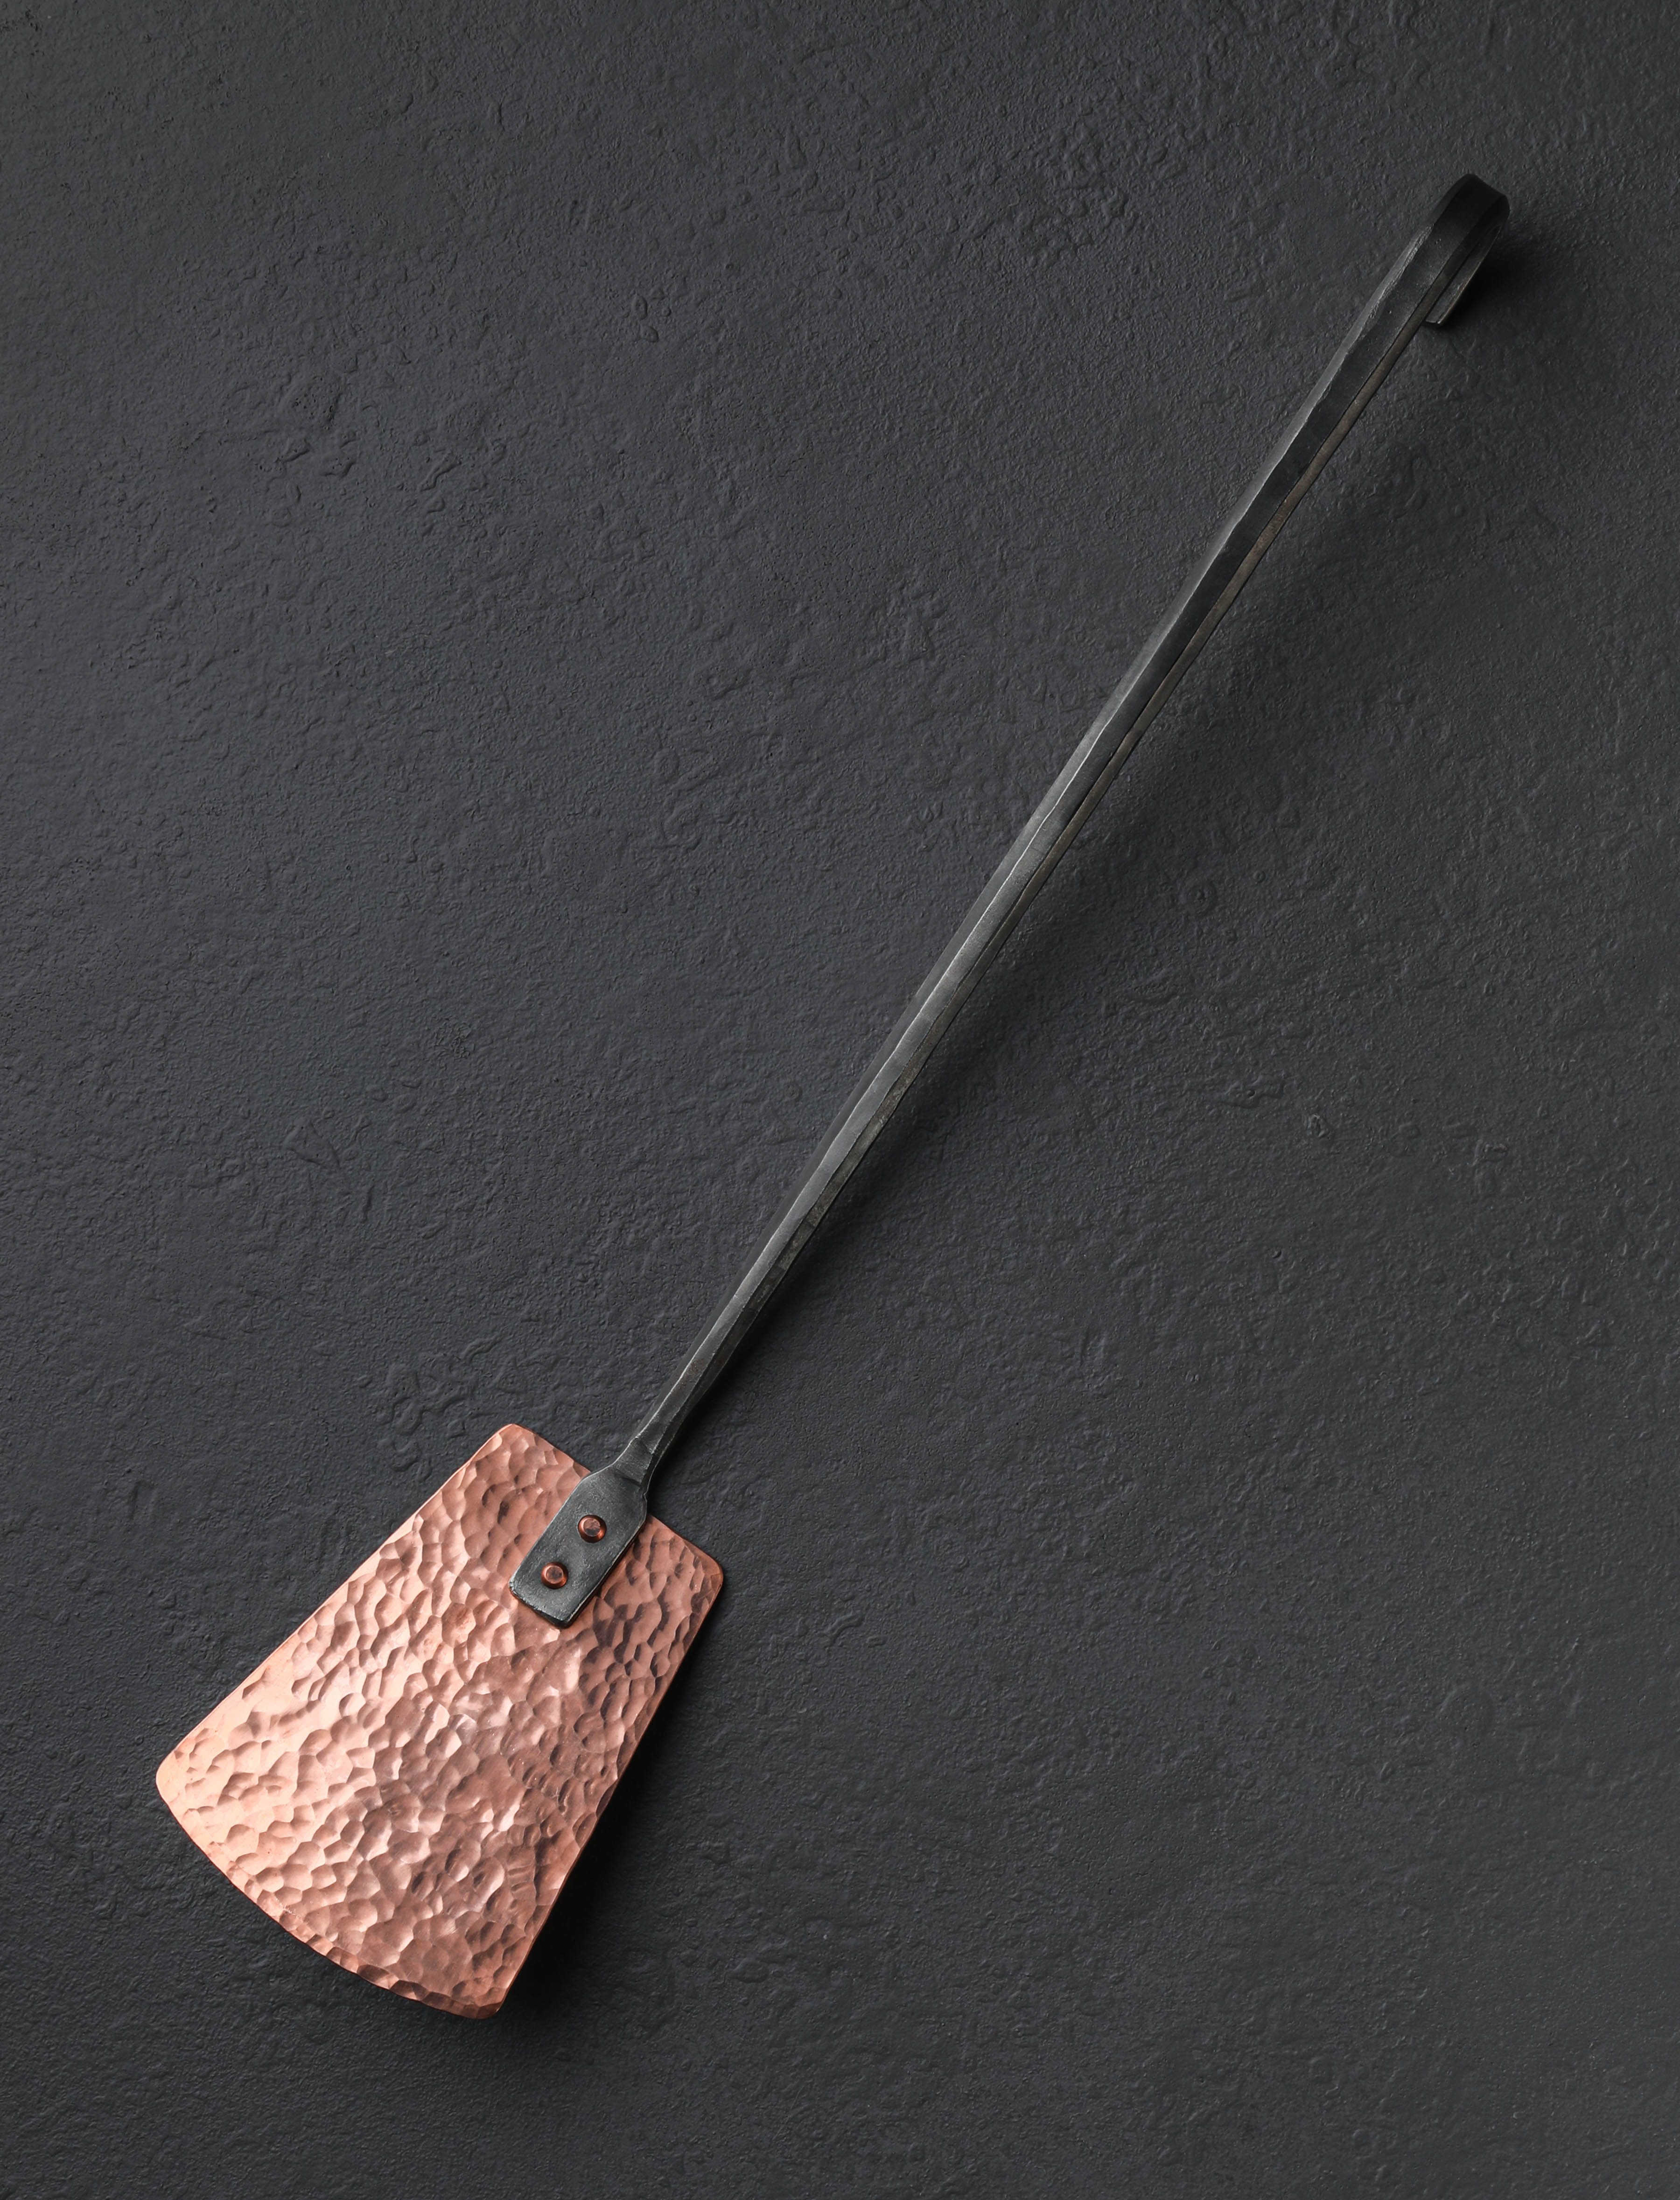 Slotted Copper Serving Spatula 